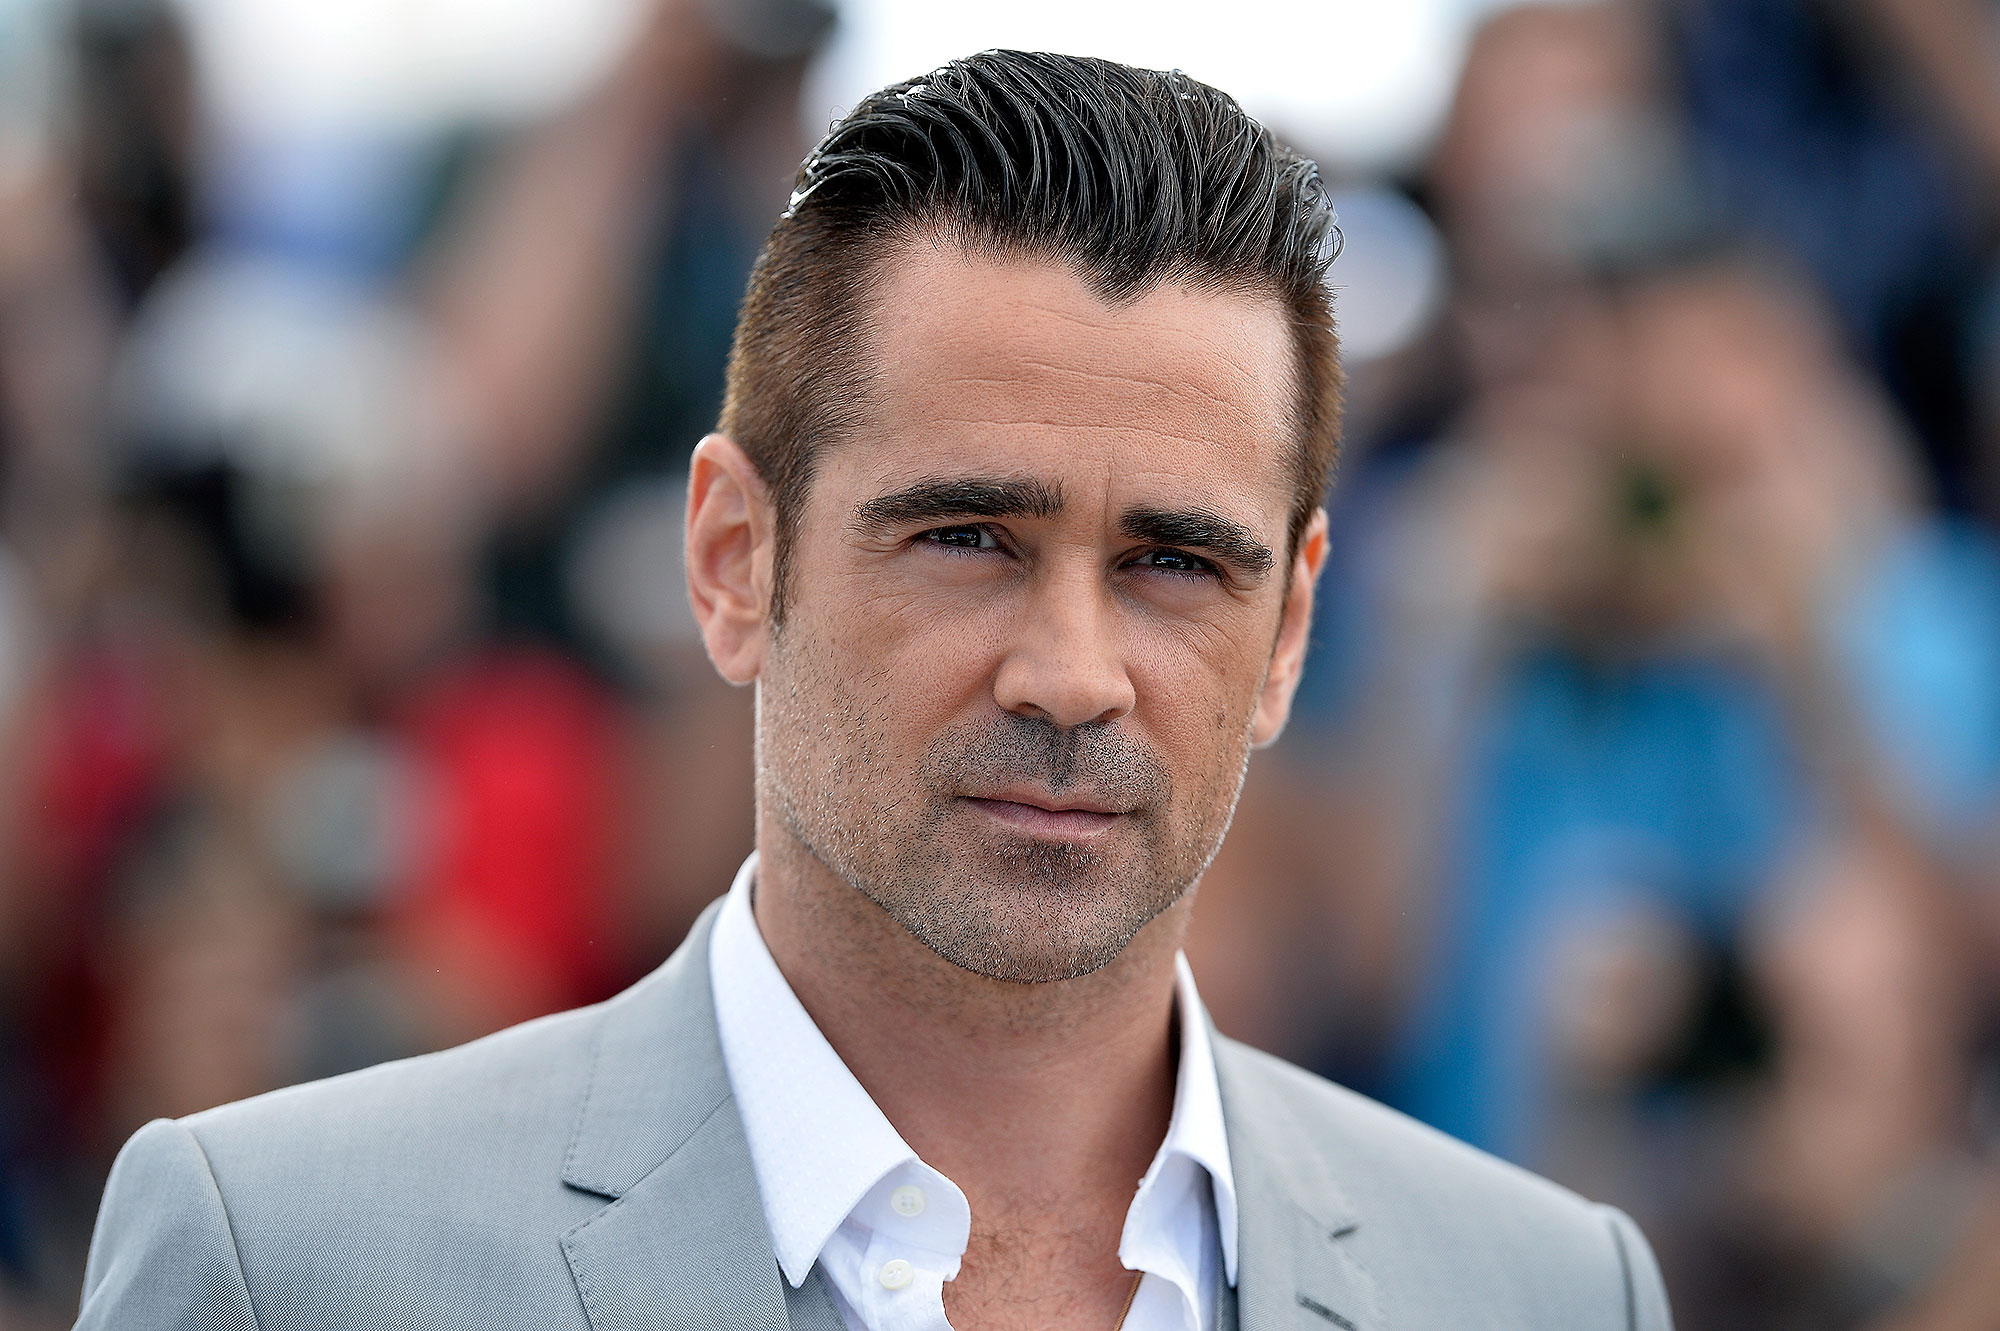 Colin Farrell discusses his DNA Test Results on the Talk Show